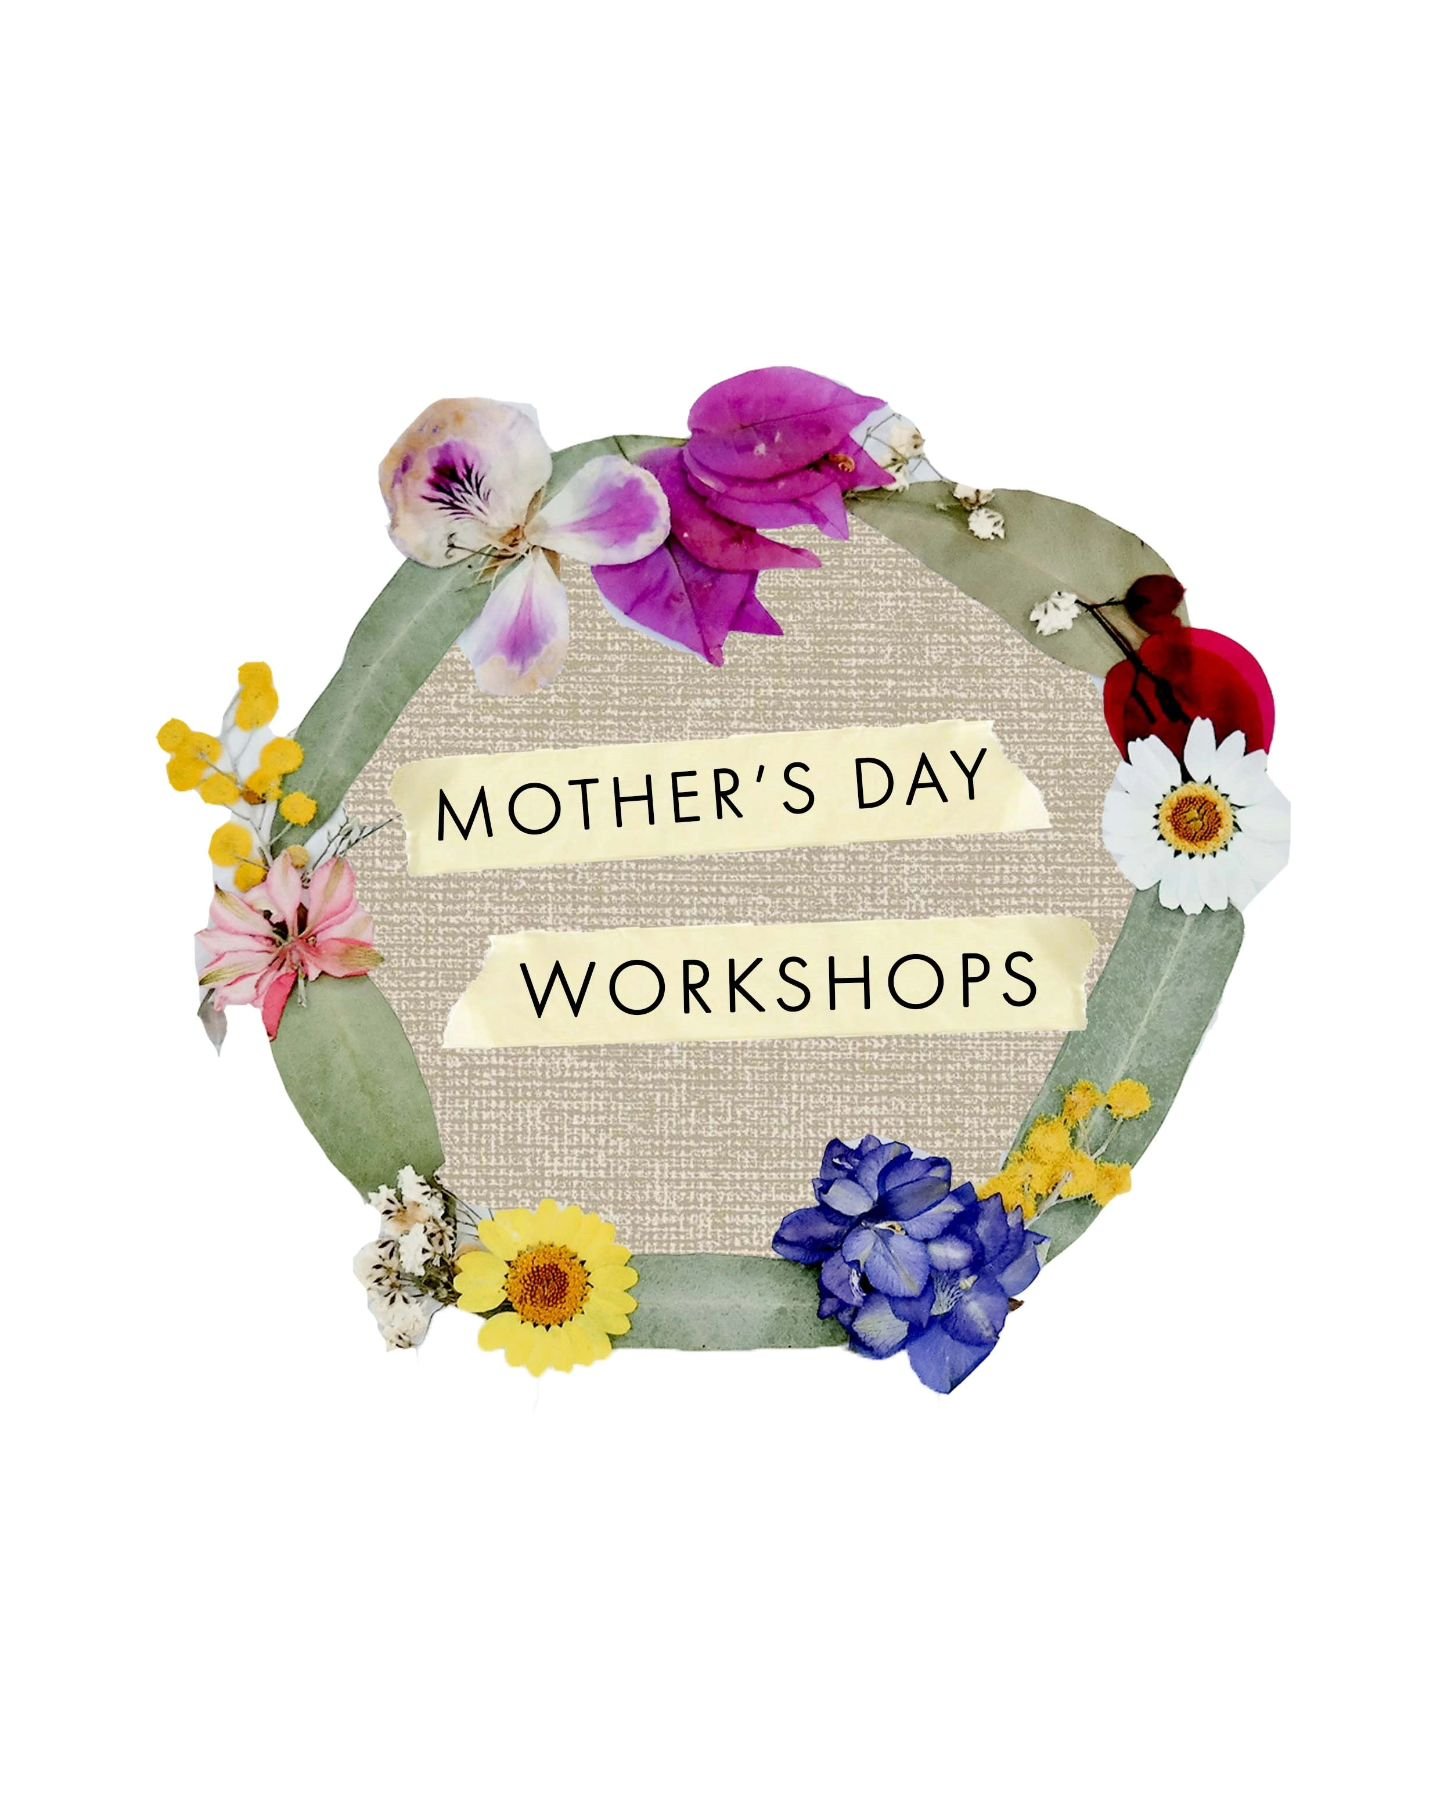 🌸 Mother's Day Workshops 🌸 

You have 3 options!

1. Spend quality time with Mum at one of our workshops on Mother's Day: 12th of May, Sunday:
🌼 Morning: Pressed Flower Framing Workshop
🎨 Afternoon: Textured Native Botanical Workshop

2. Buy Mum 